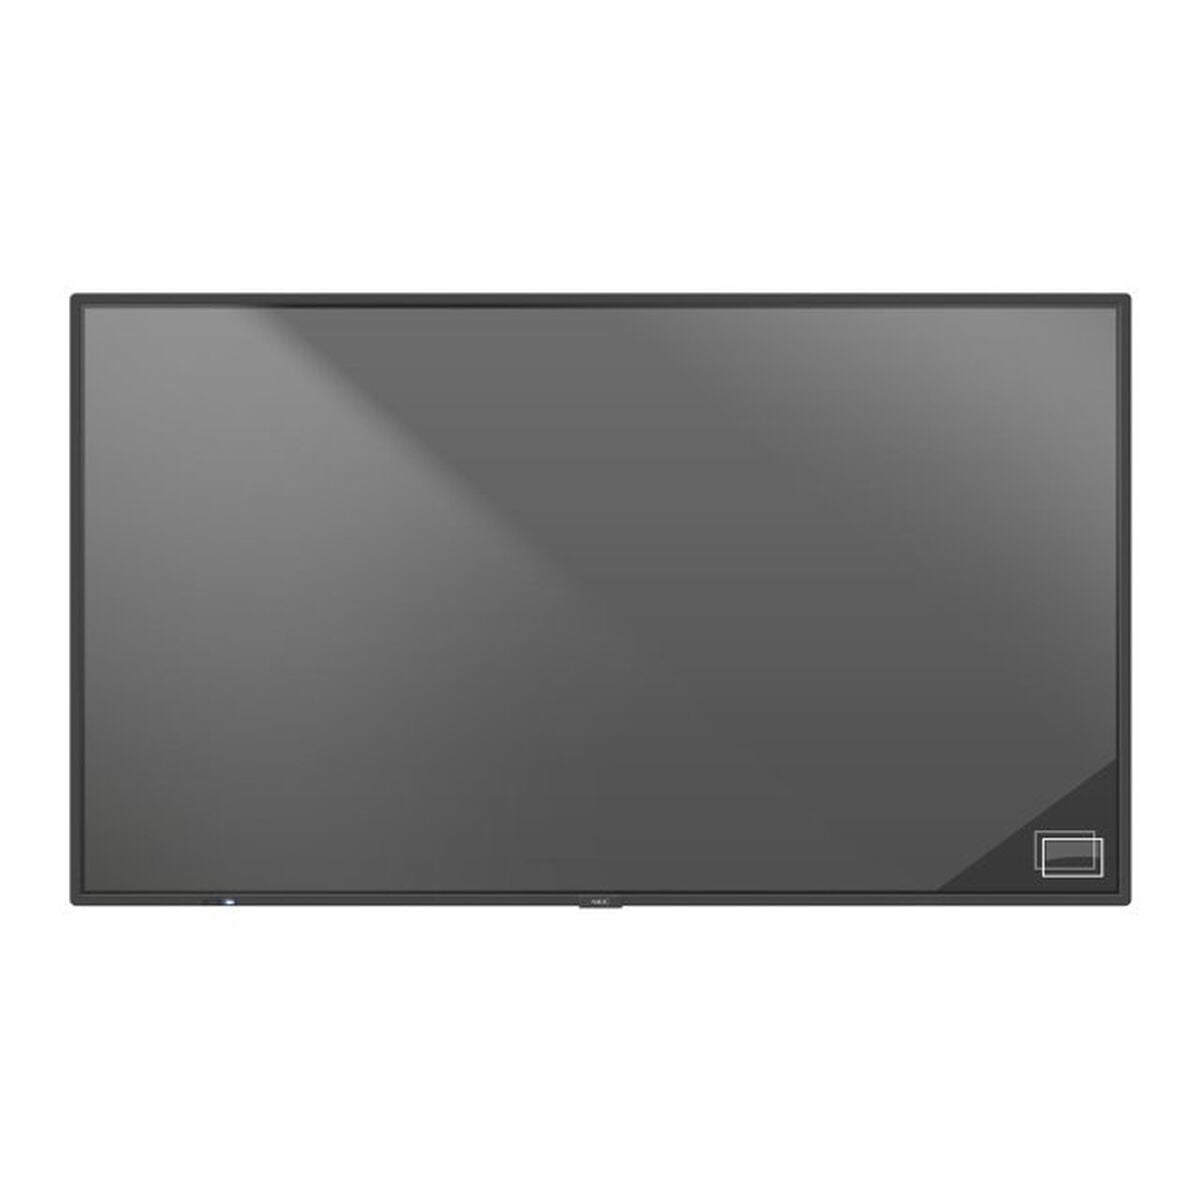 Monitor Videowall NEC P435 PG-2 4K Ultra HD 49" 50-60 Hz, NEC, Computing, monitor-videowall-nec-p435-pg-2-4k-ultra-hd-49-50-60-hz, :RN OFFICE, Brand_NEC, category-reference-2609, category-reference-2642, category-reference-2644, category-reference-t-19685, category-reference-t-19902, computers / peripherals, Condition_NEW, office, Price_+ 1000, Teleworking, RiotNook